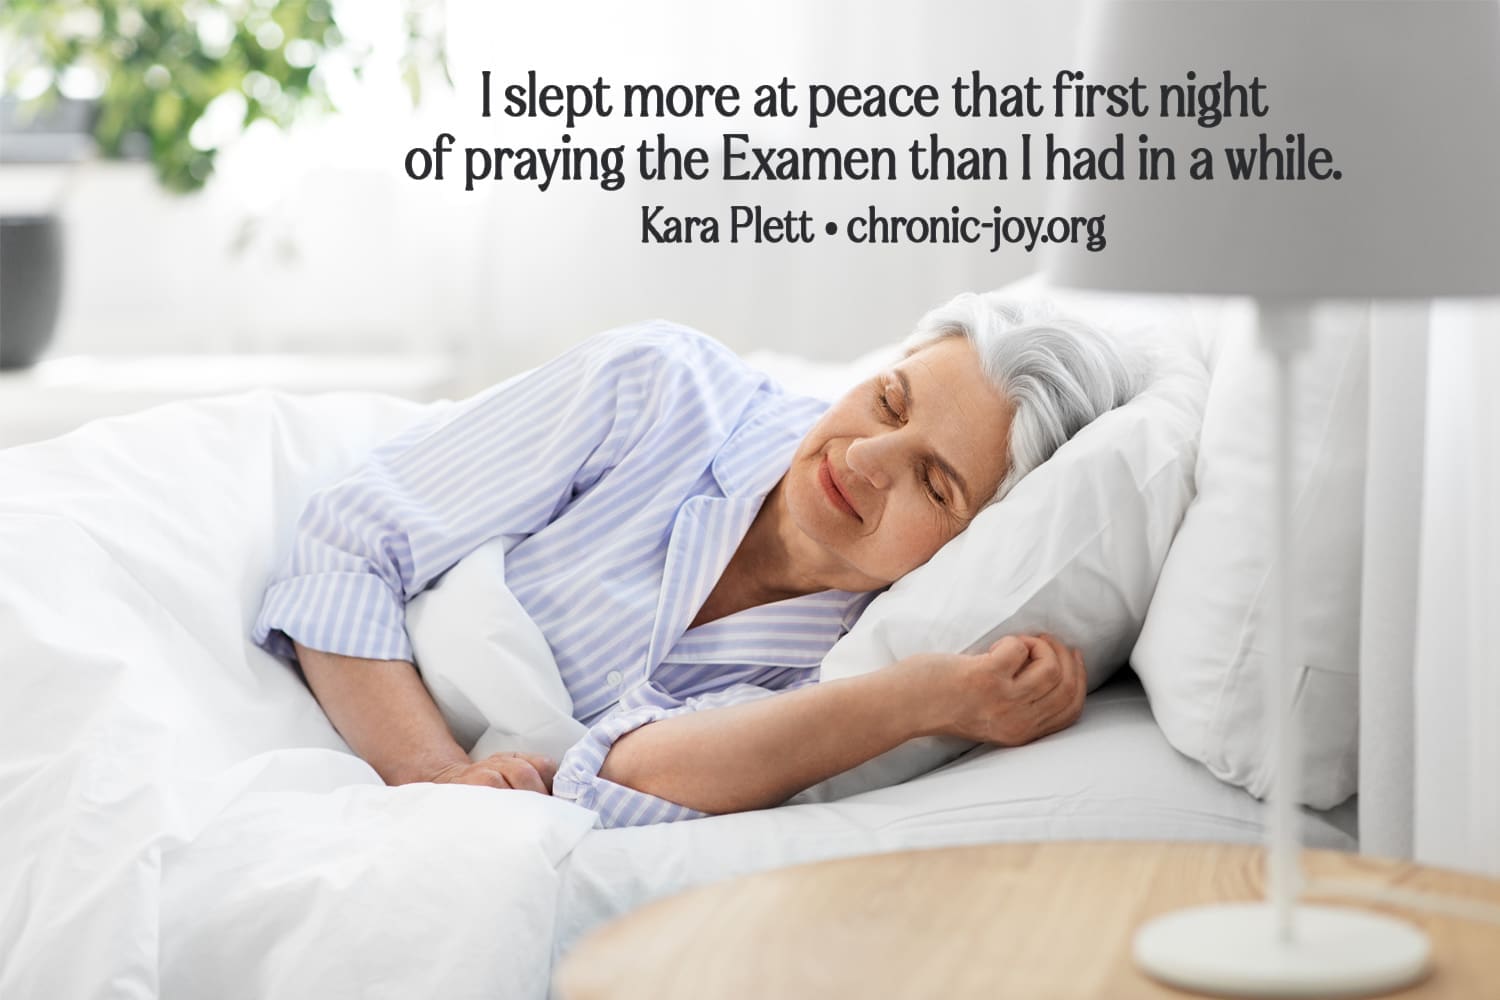 The Prayer of Examen can bring peace.